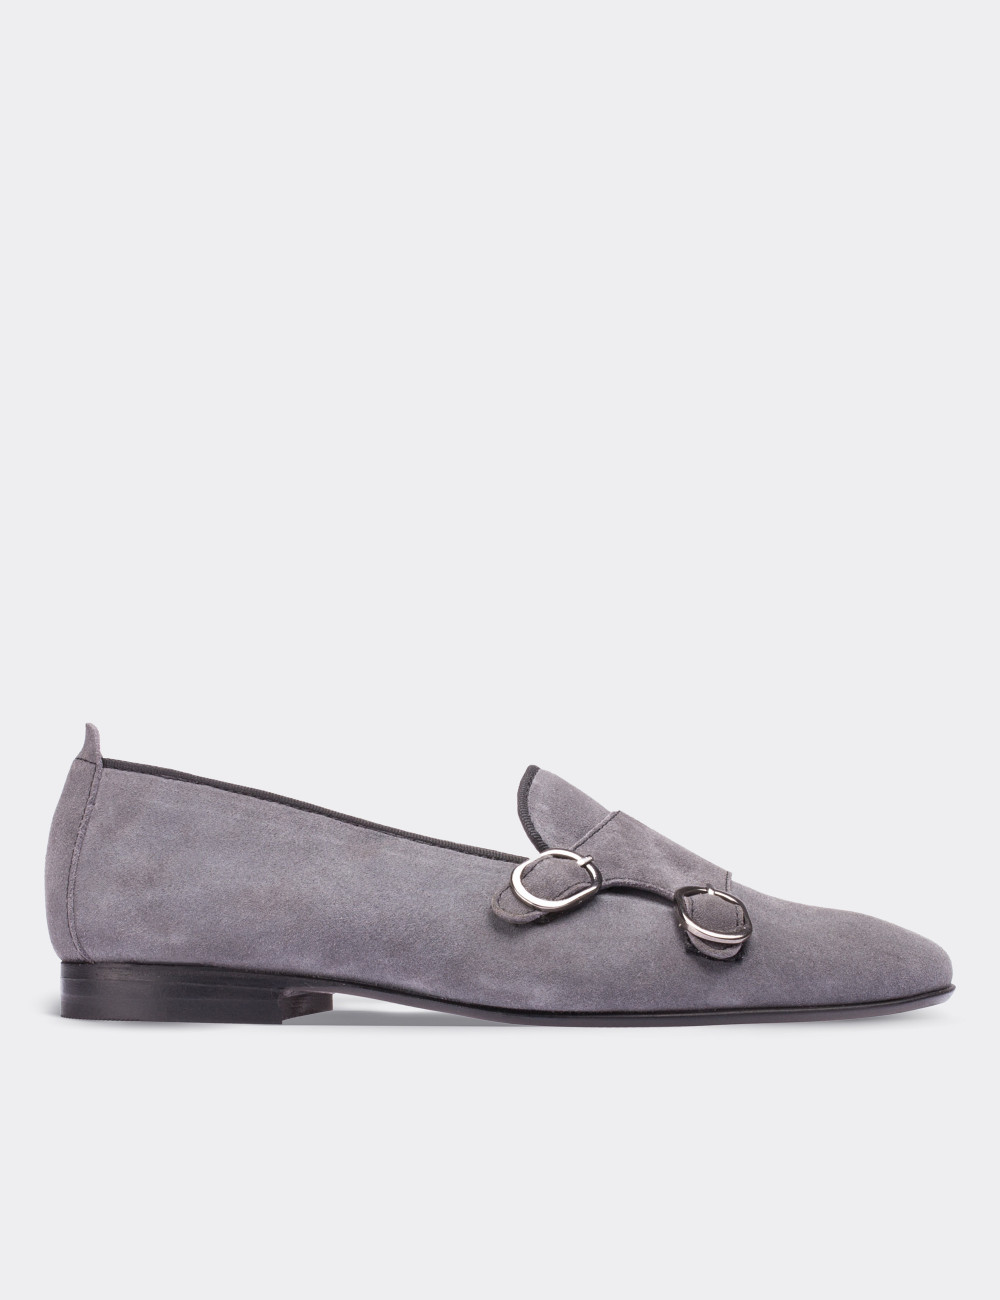 Gray Suede Leather Loafers - Deery